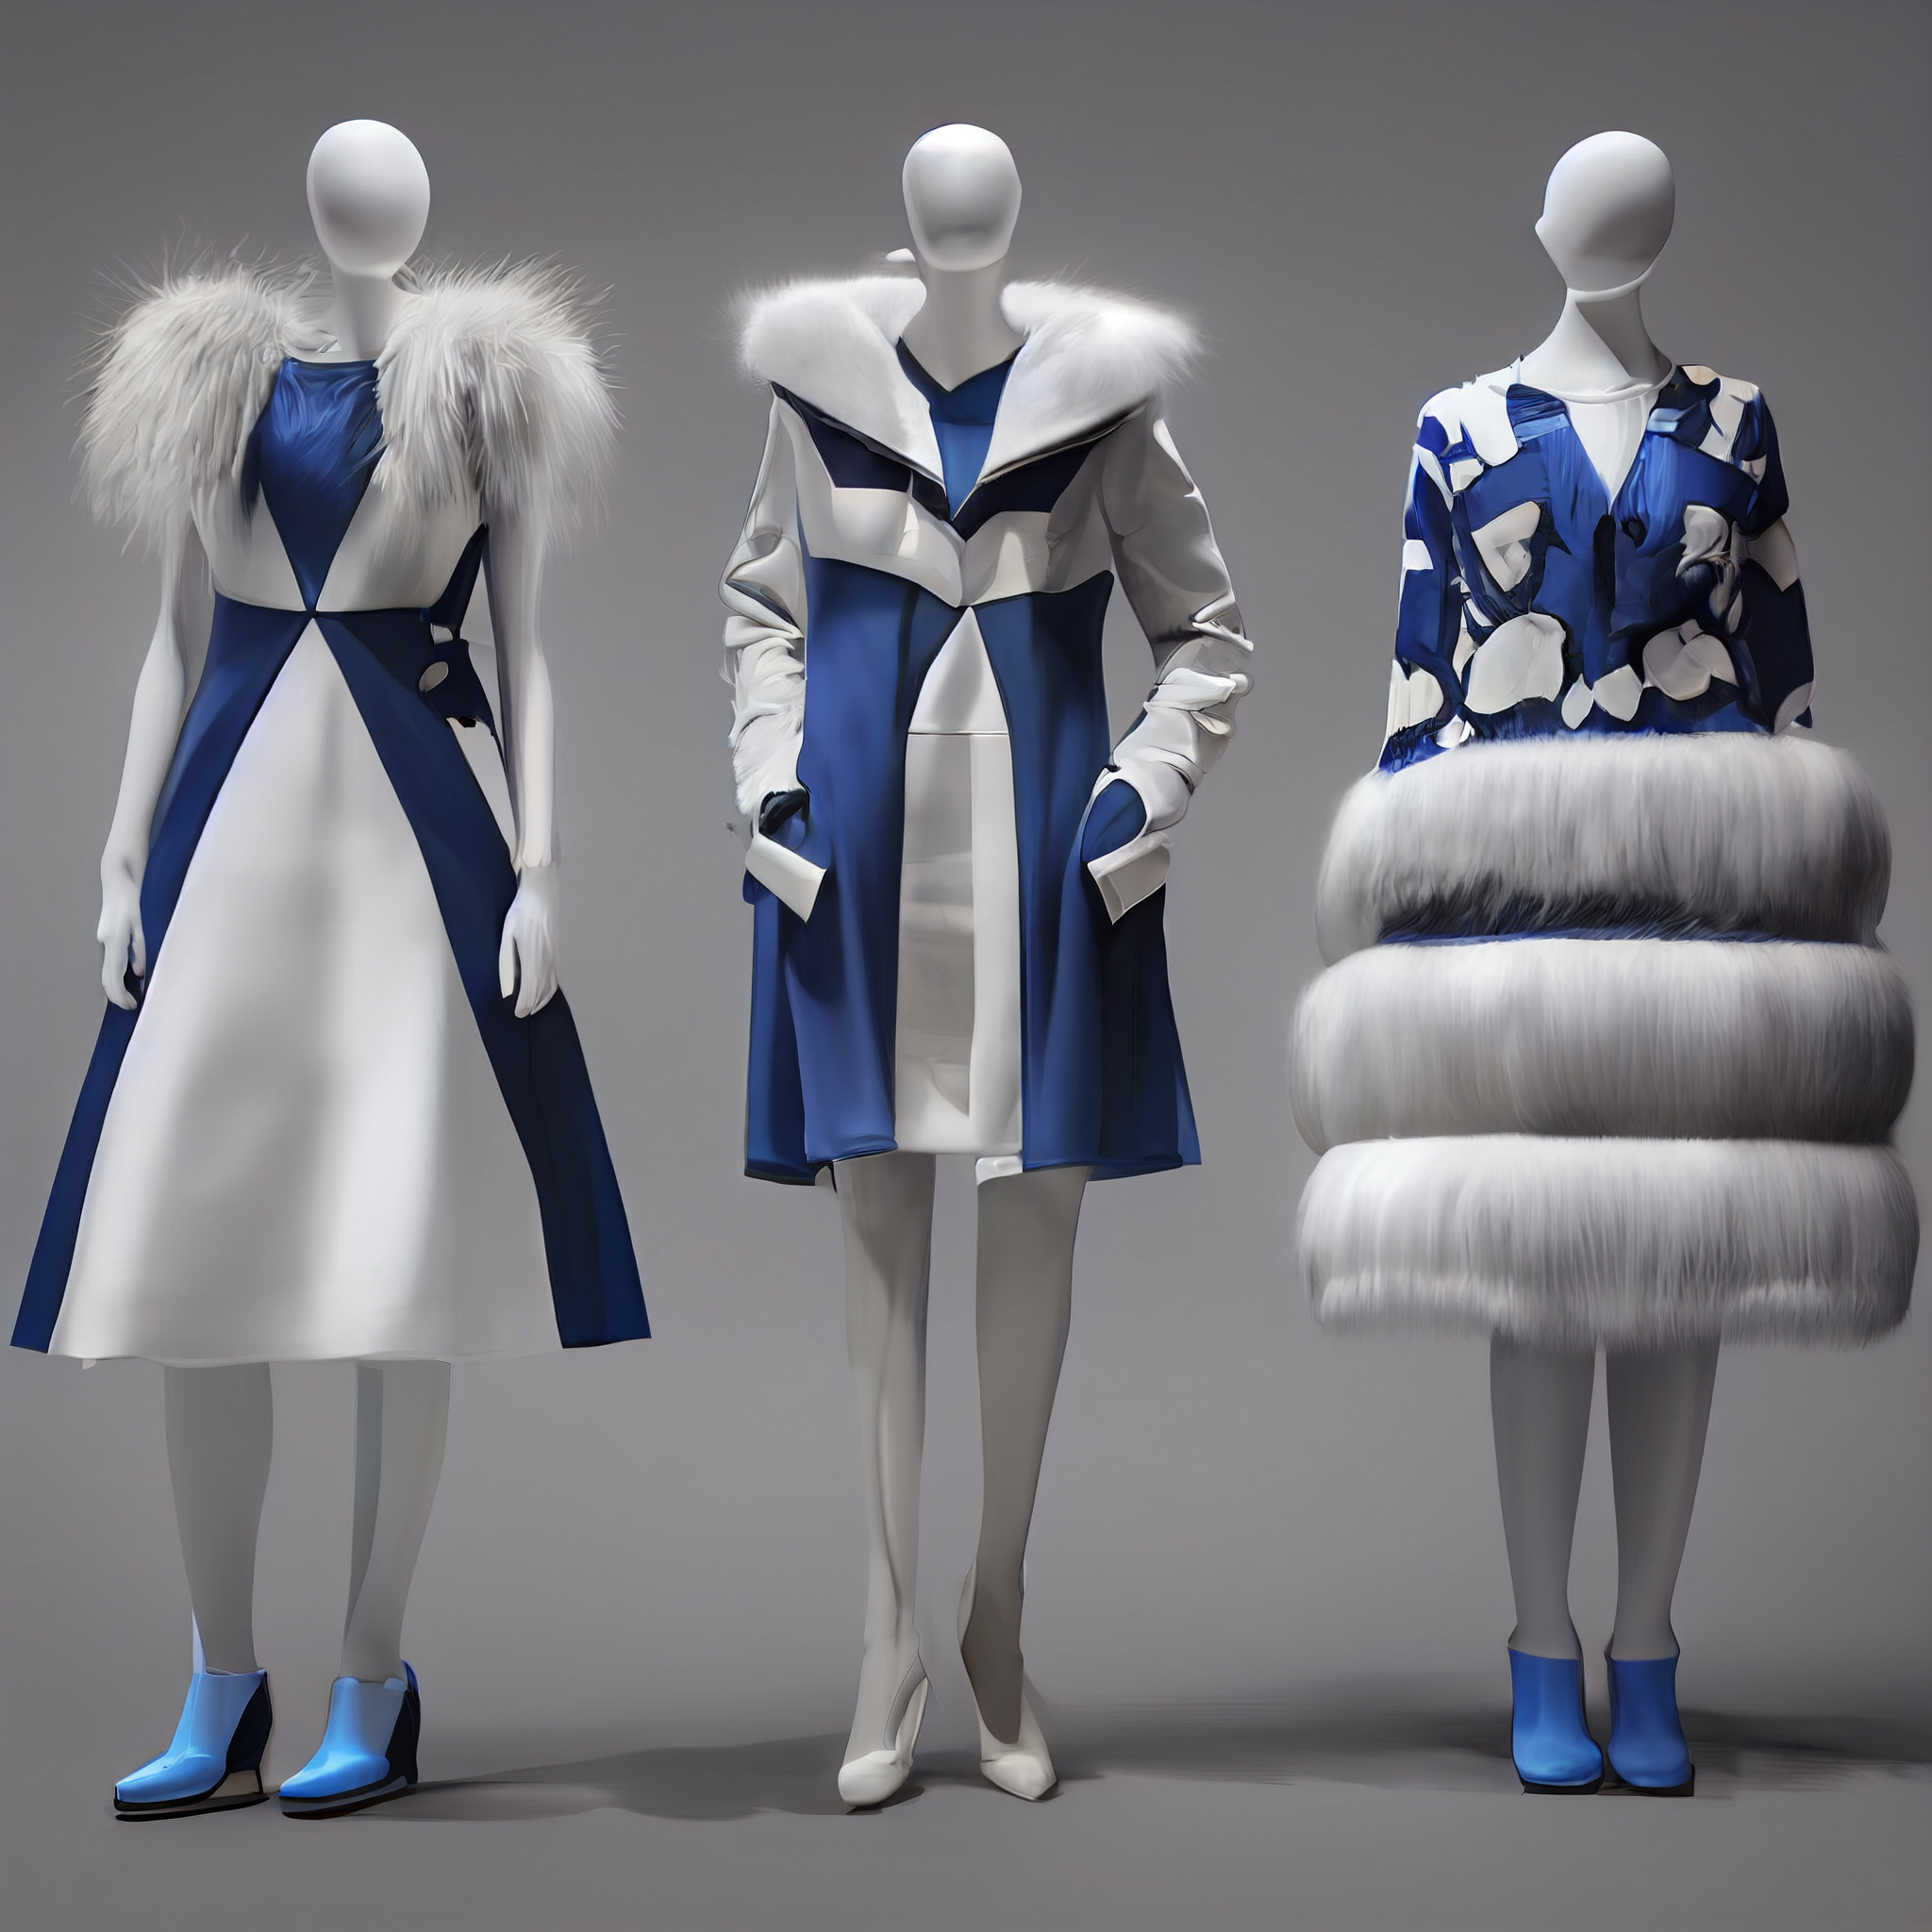 prompthunt: Three Fashion Design Renderings , white clothing mannequin,  Blue and white dress, Embroidered clothing pattern of glacier, Fur fabric,  high-quality rendering, 3d, fine details, illustrations, lifelike, c4d, 8k